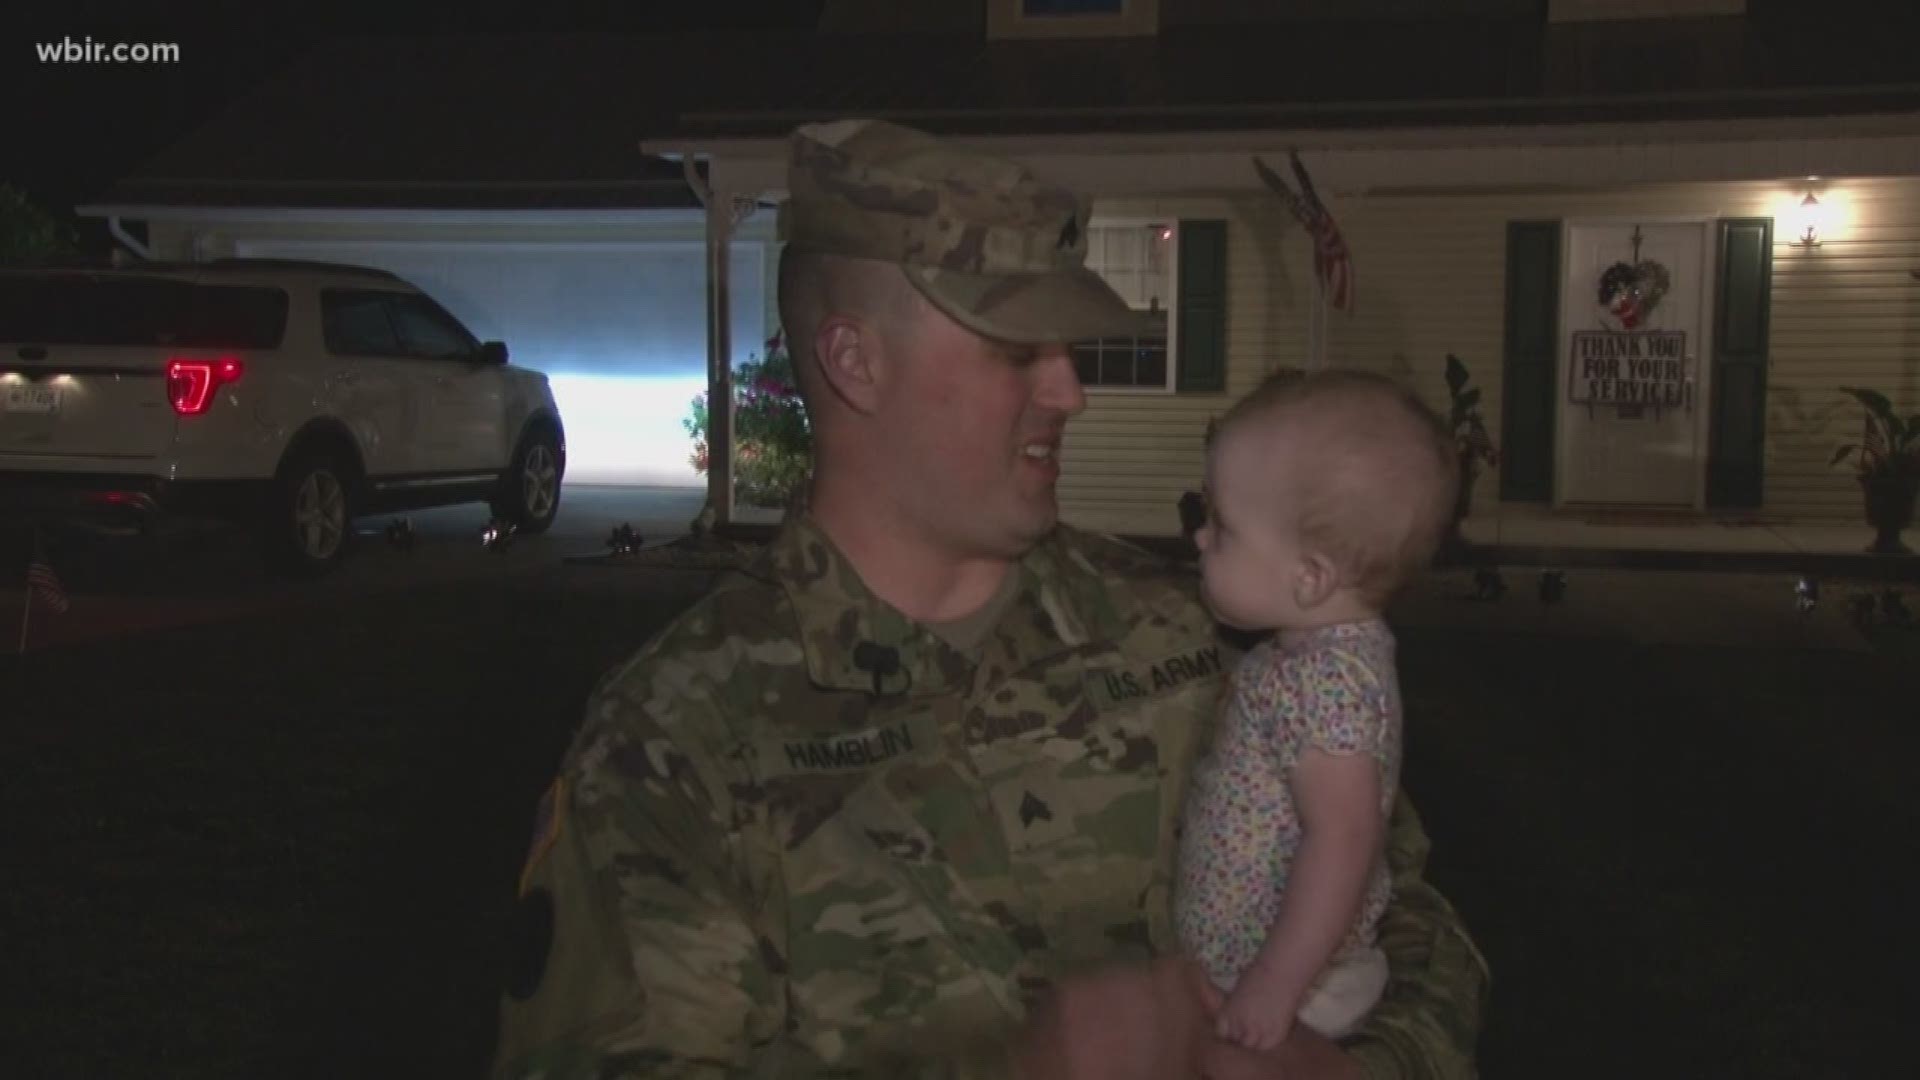 A sweet homecoming for an East Tennessee soldier. 
Sergeant Jacob Hamblin was escorted home late last night by the Campbell County Sheriff's Office. He serves in the 278th Tennessee Army National Guard and just finished a one-year deployment in Poland.